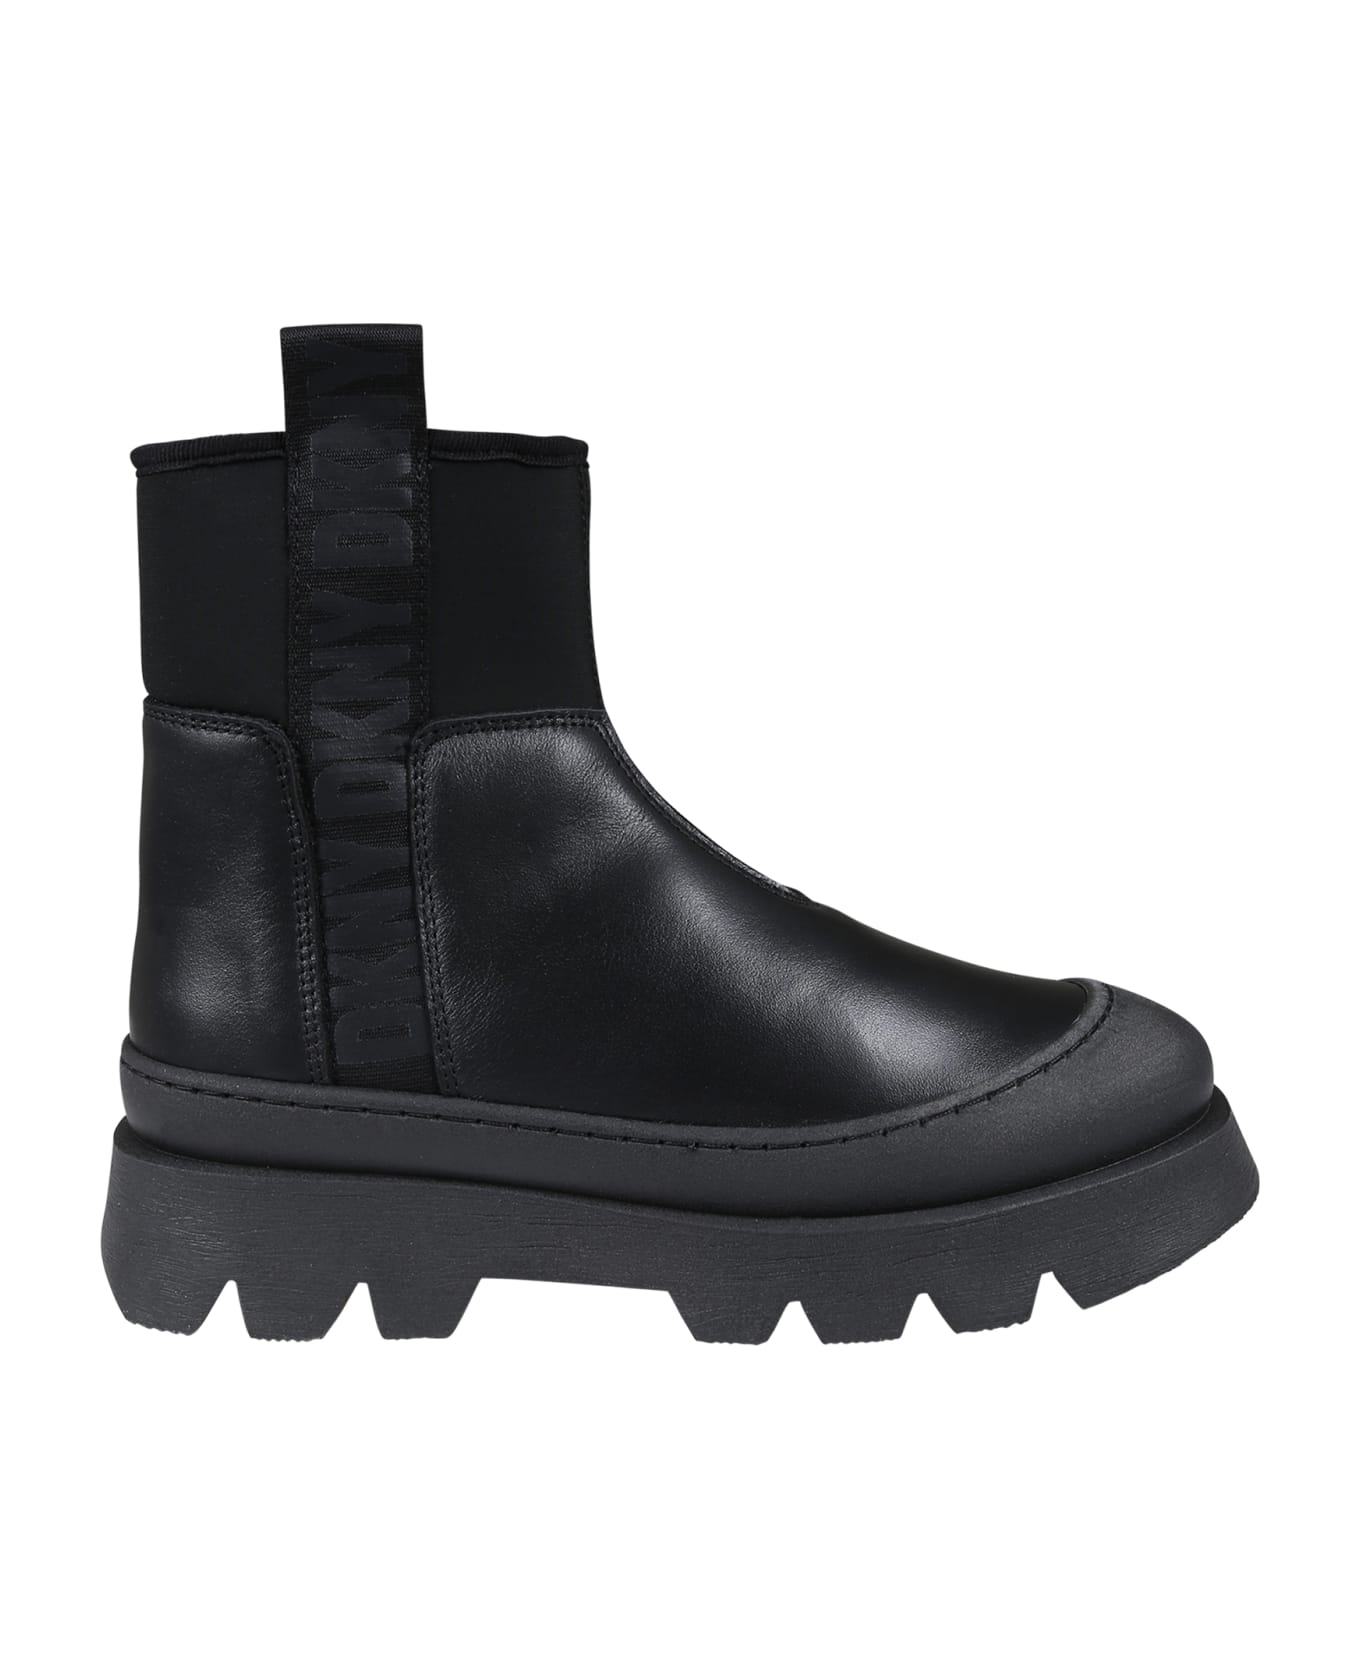 DKNY Black Ankle Boots For Girl With Logo - Black